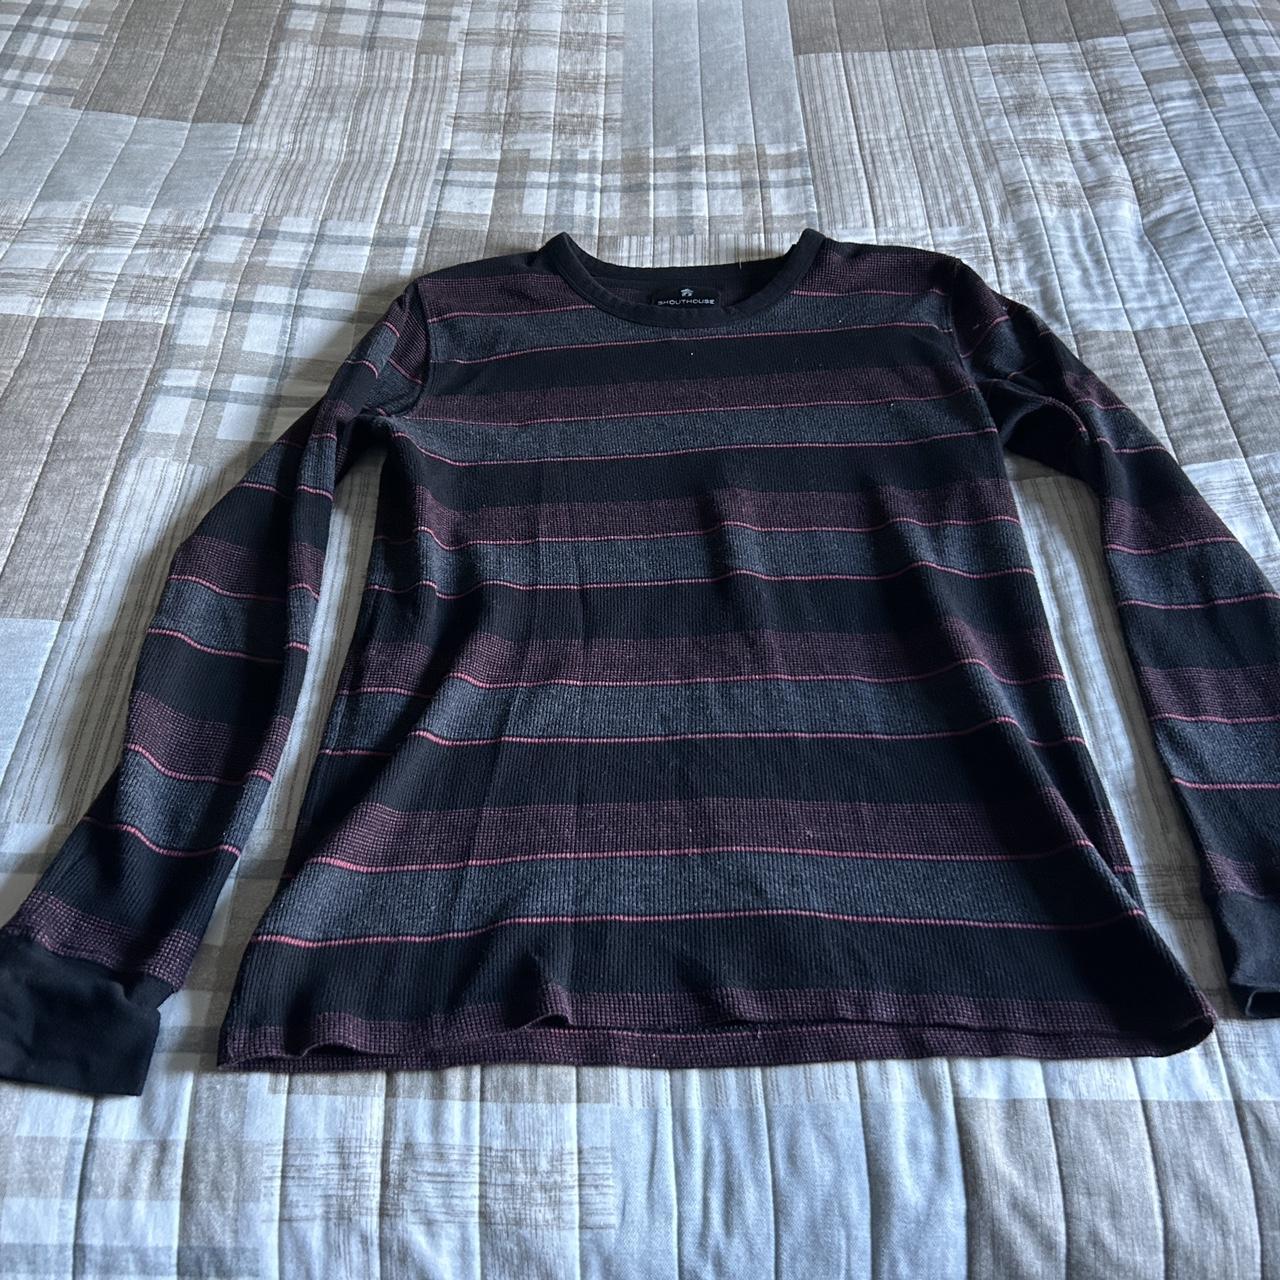 XL Southouse stripped thermal - Depop